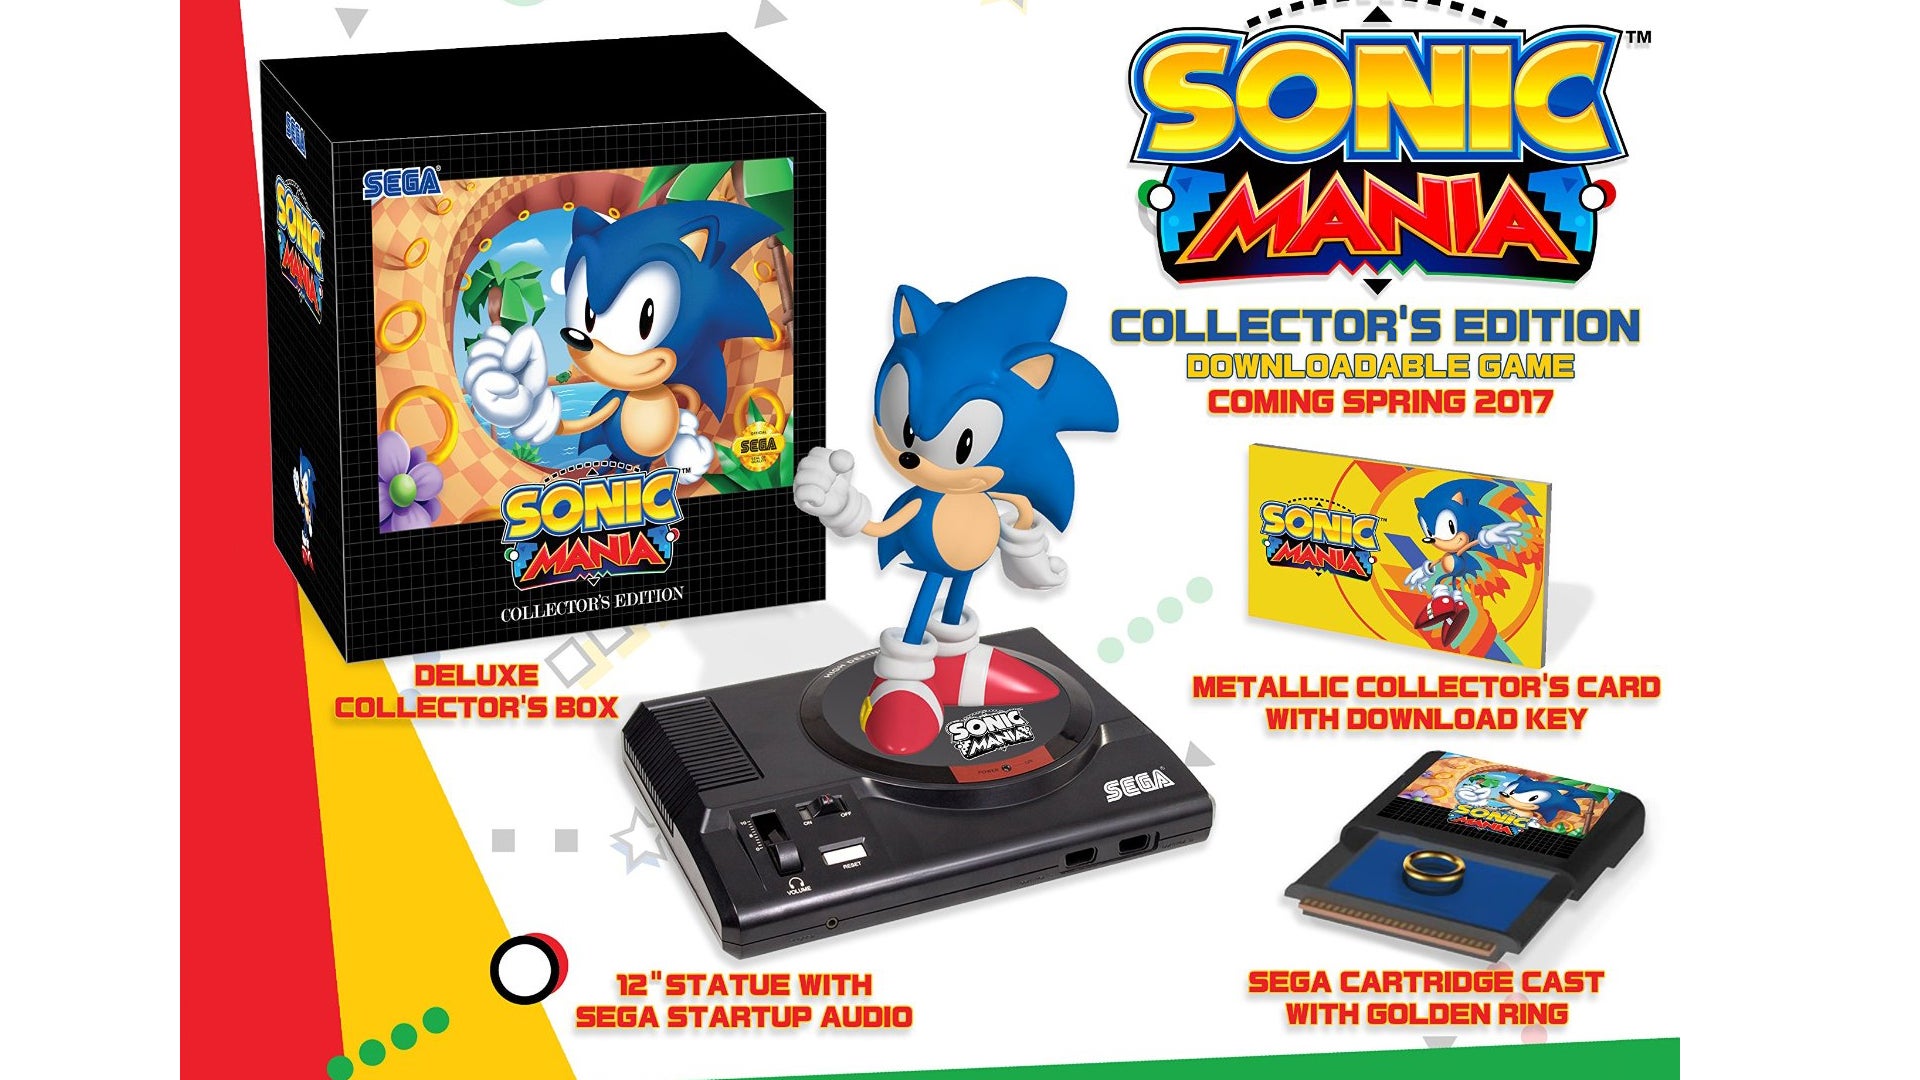 Image for Sonic Mania Collector's Edition is getting a European release and you can pre-order now